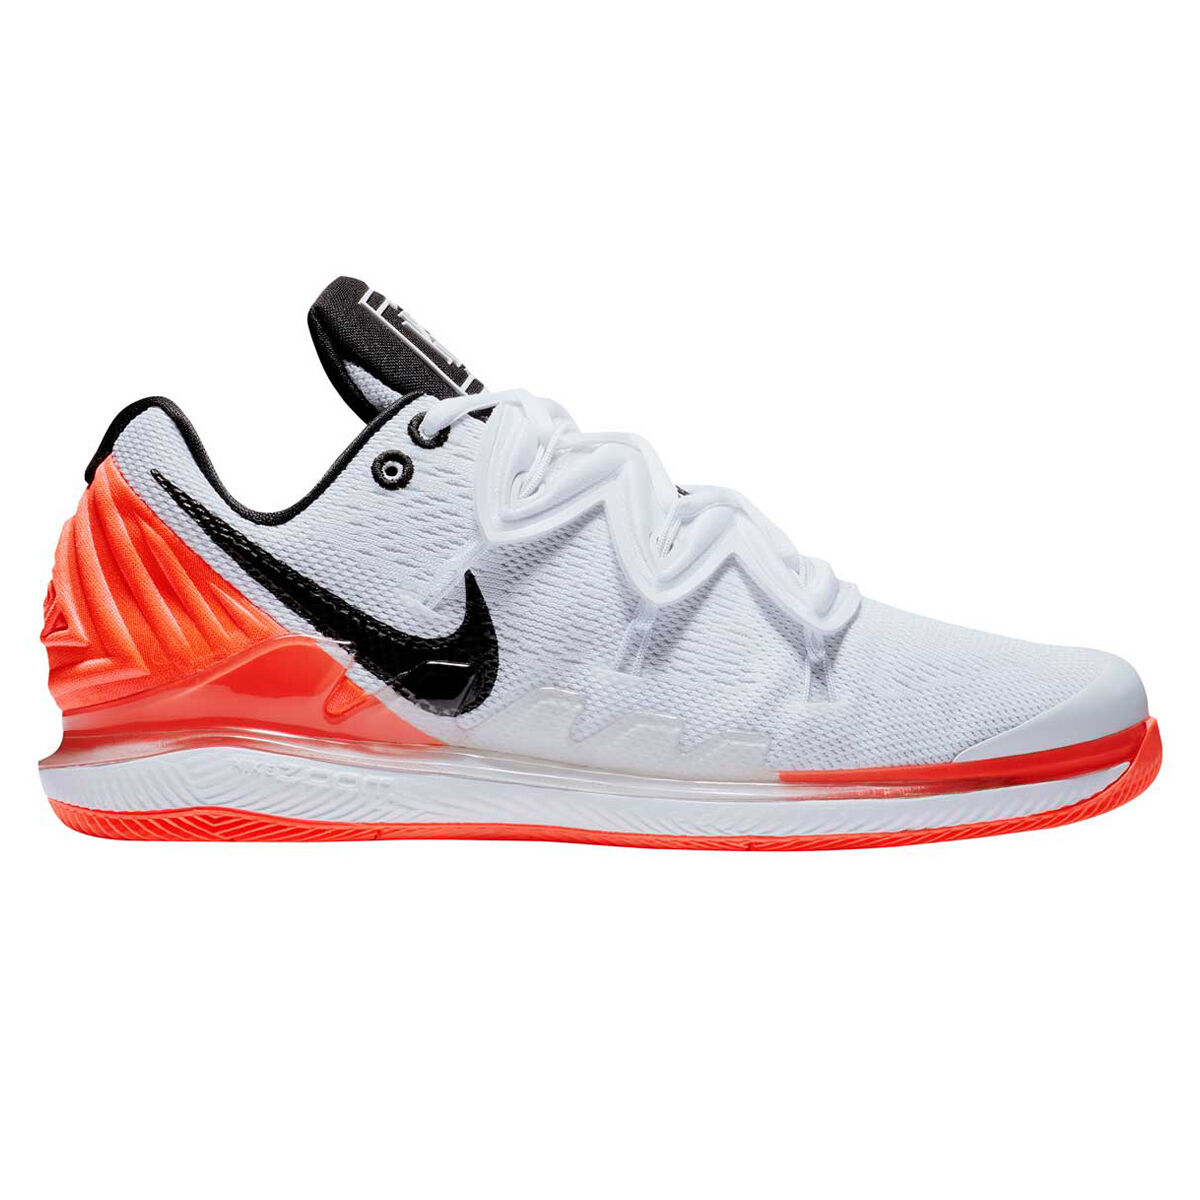 Buy Nike Kyrie 5 Basketball Shoes M14 W15.5 Amazon.in